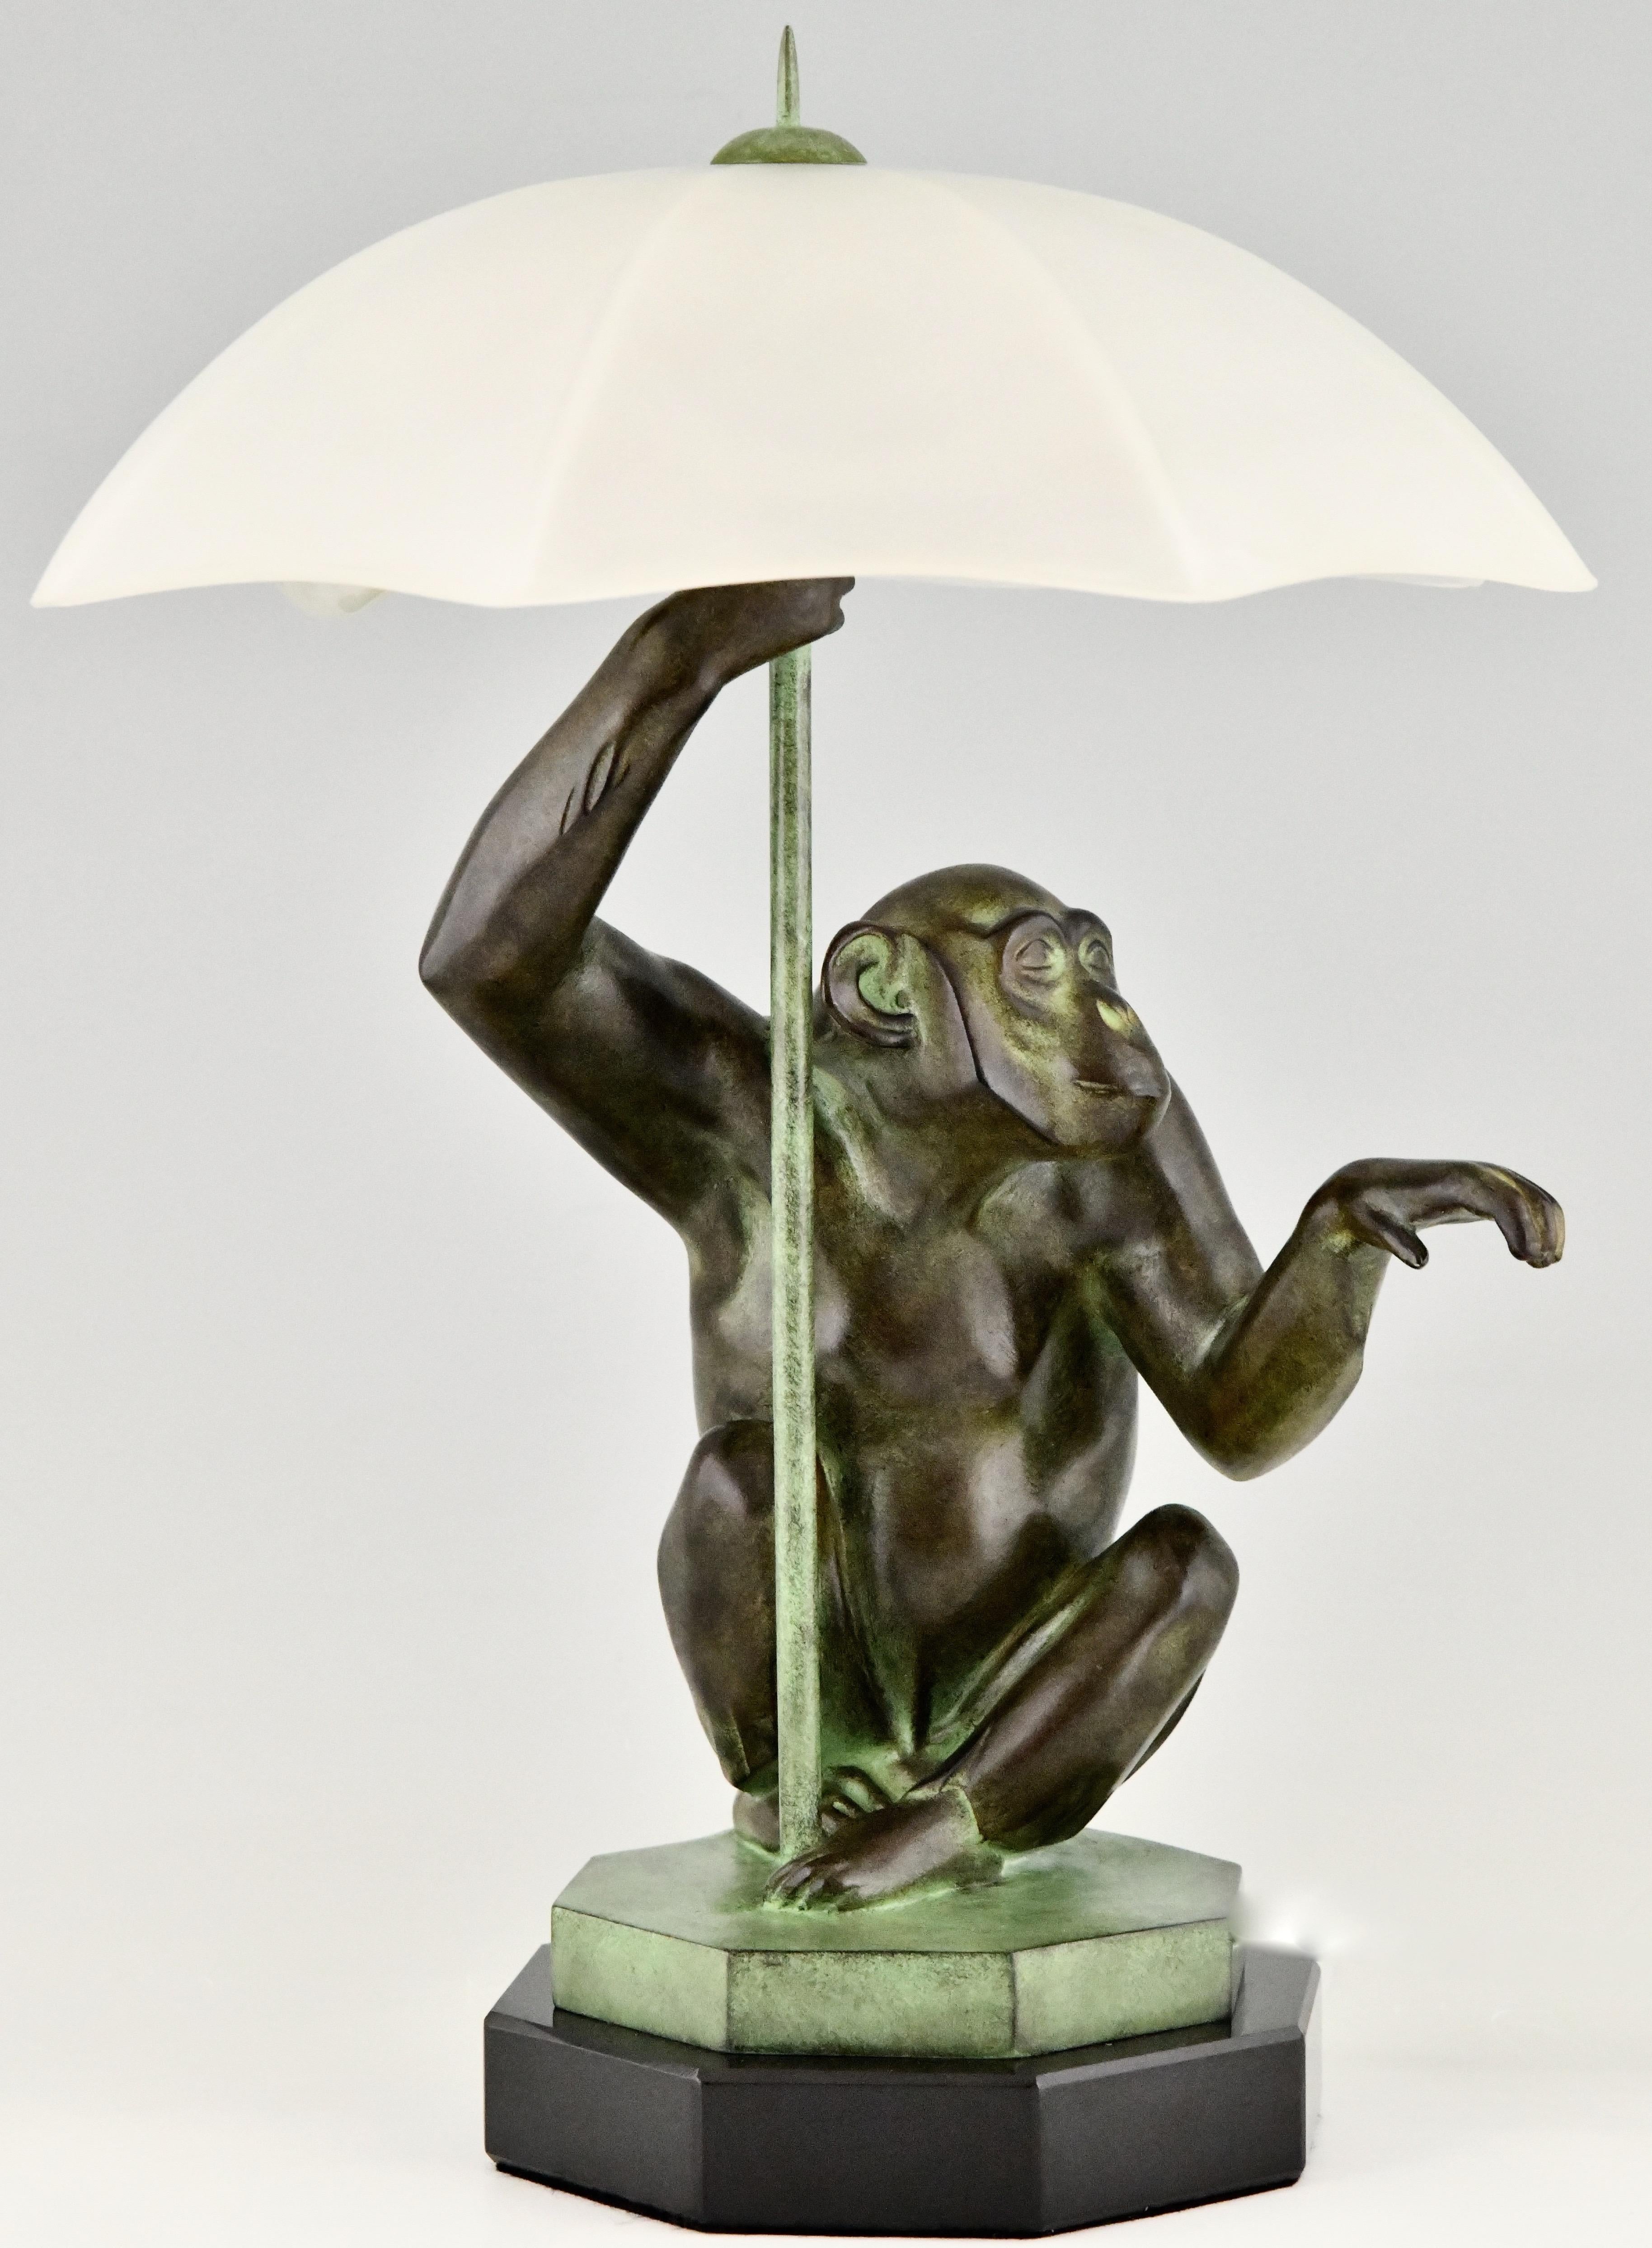 Description: Art Deco style table lamp seated monkey with umbrella.
Artist / maker: Max Le Verrier.
Signature / marks: Le Verrier.
Design form 1930.
Posthumous contemporary sculpture, cast at the Le Verrier Foundry in France.
Material: Green